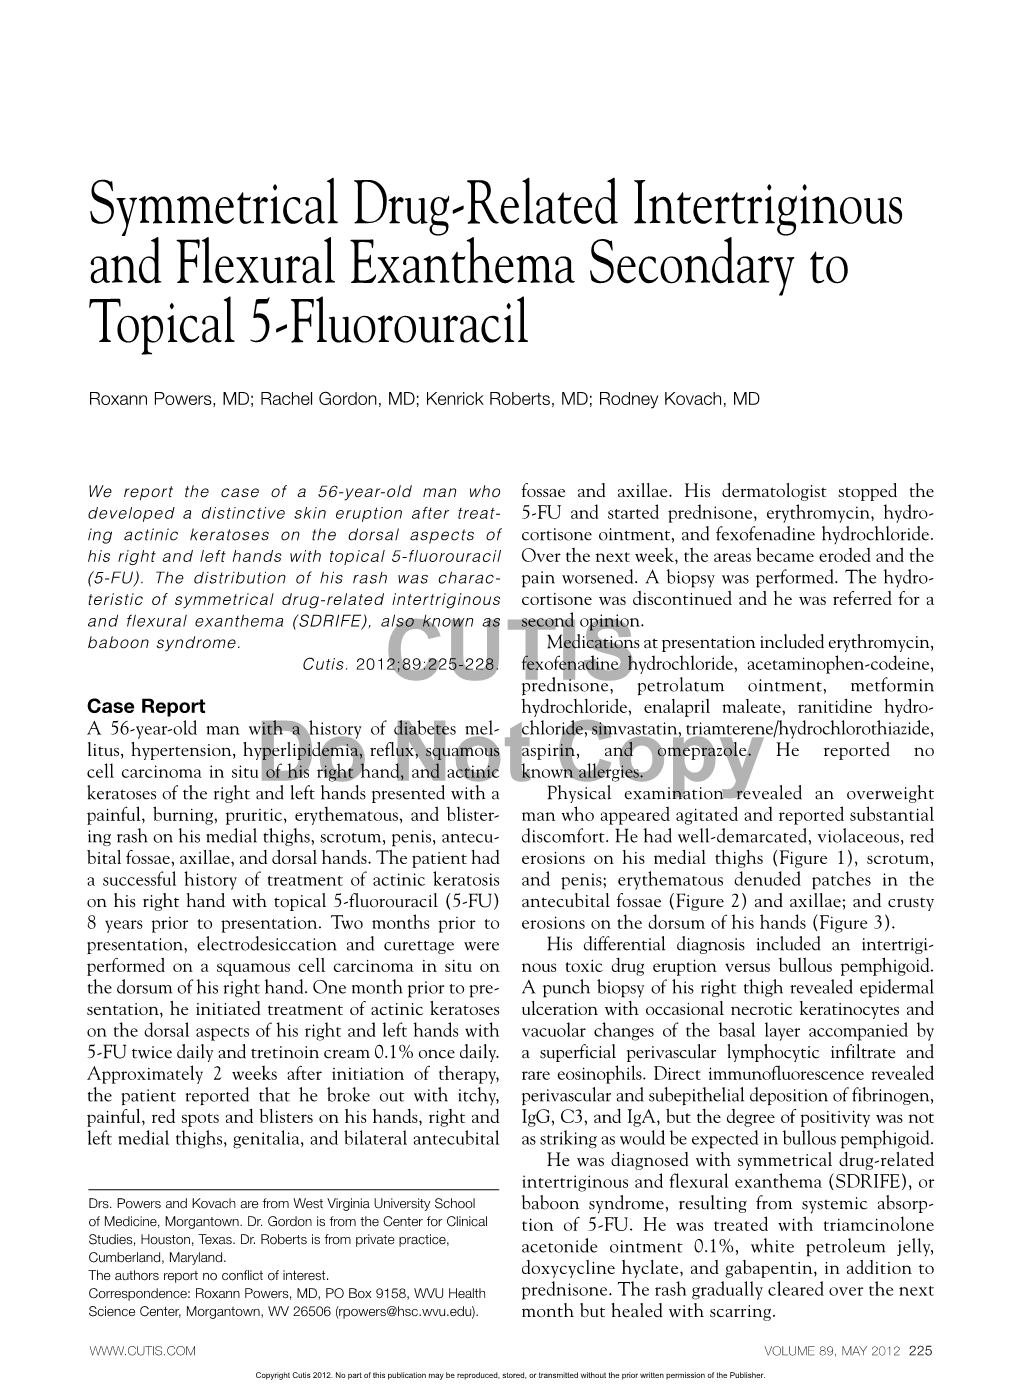 Symmetrical Drug-Related Intertriginous and Flexural Exanthema Secondary to Topical 5-Fluorouracil